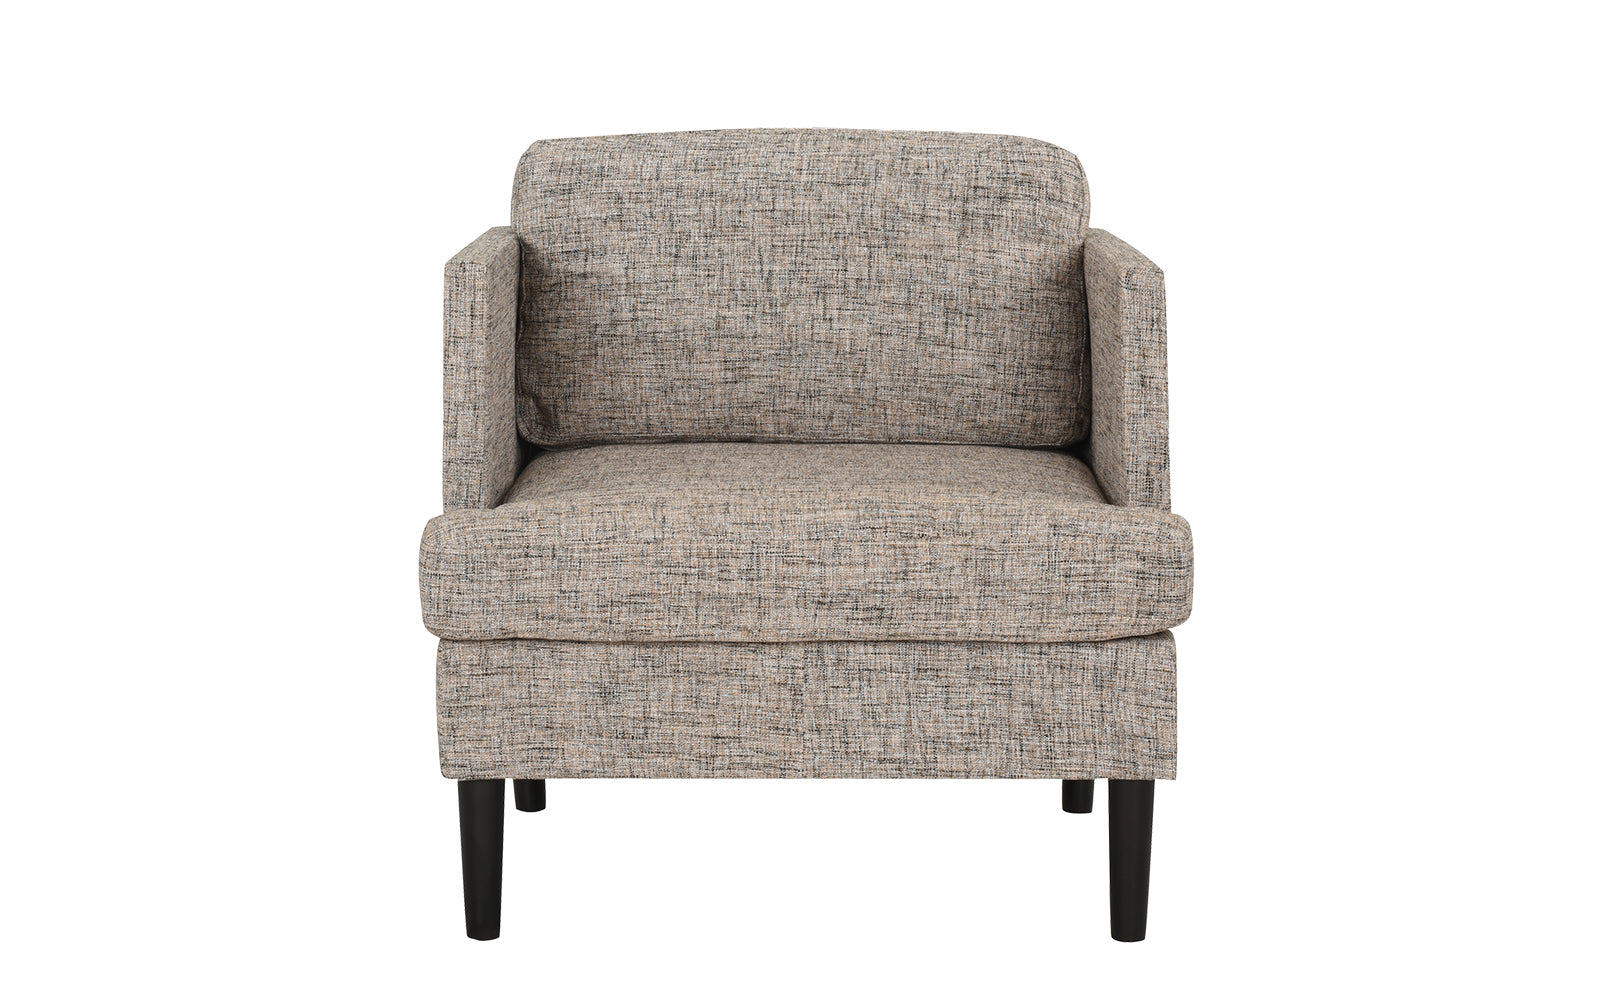 EXP290-1S-ASBR August Modern Armchair with Wooden Legs sku EXP290-1S-ASBR